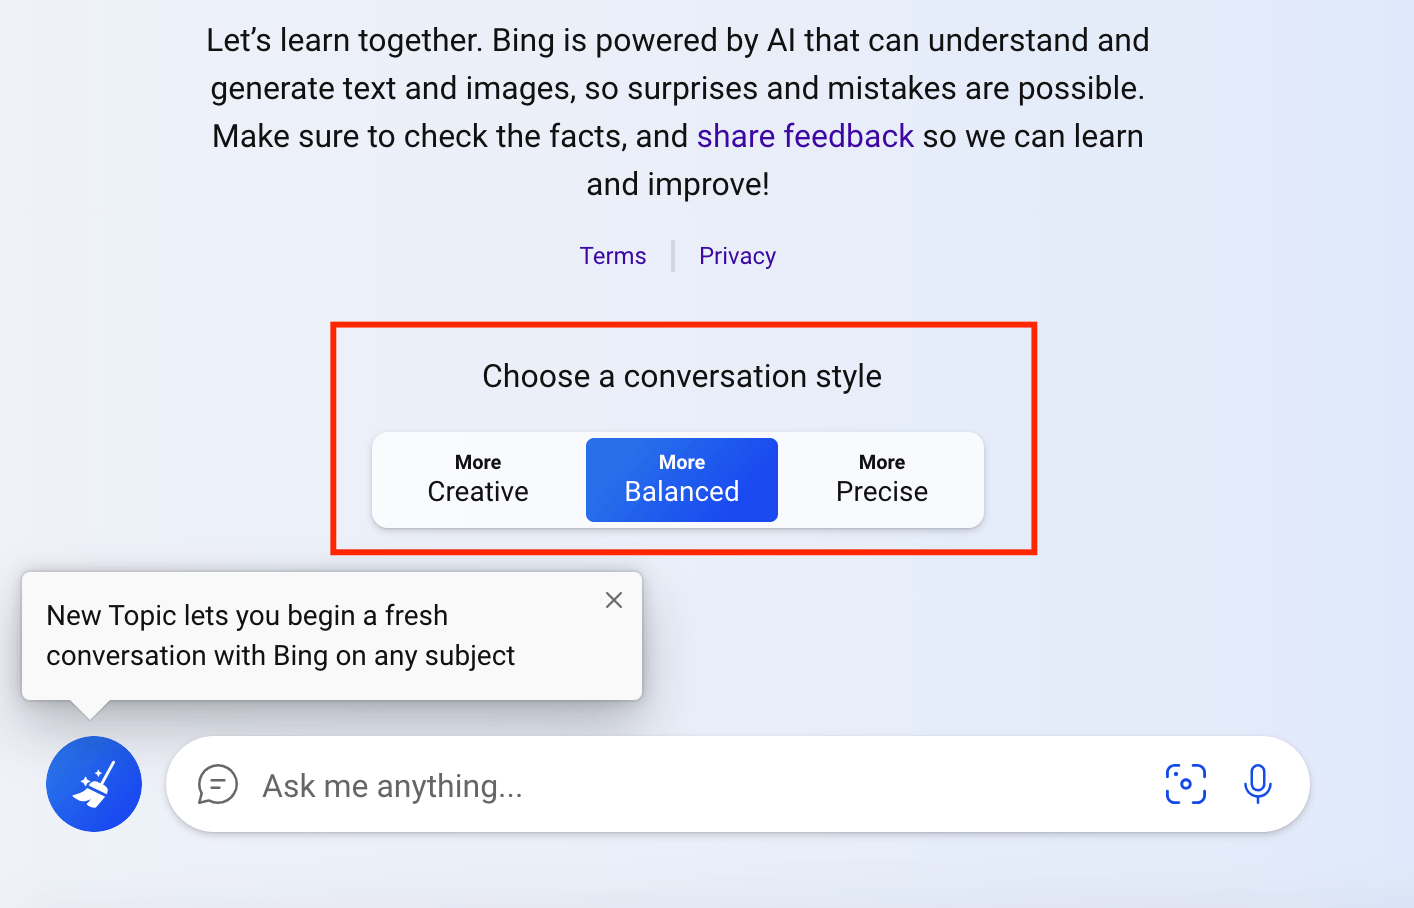 Bing AI's conversations types listed in button boxes